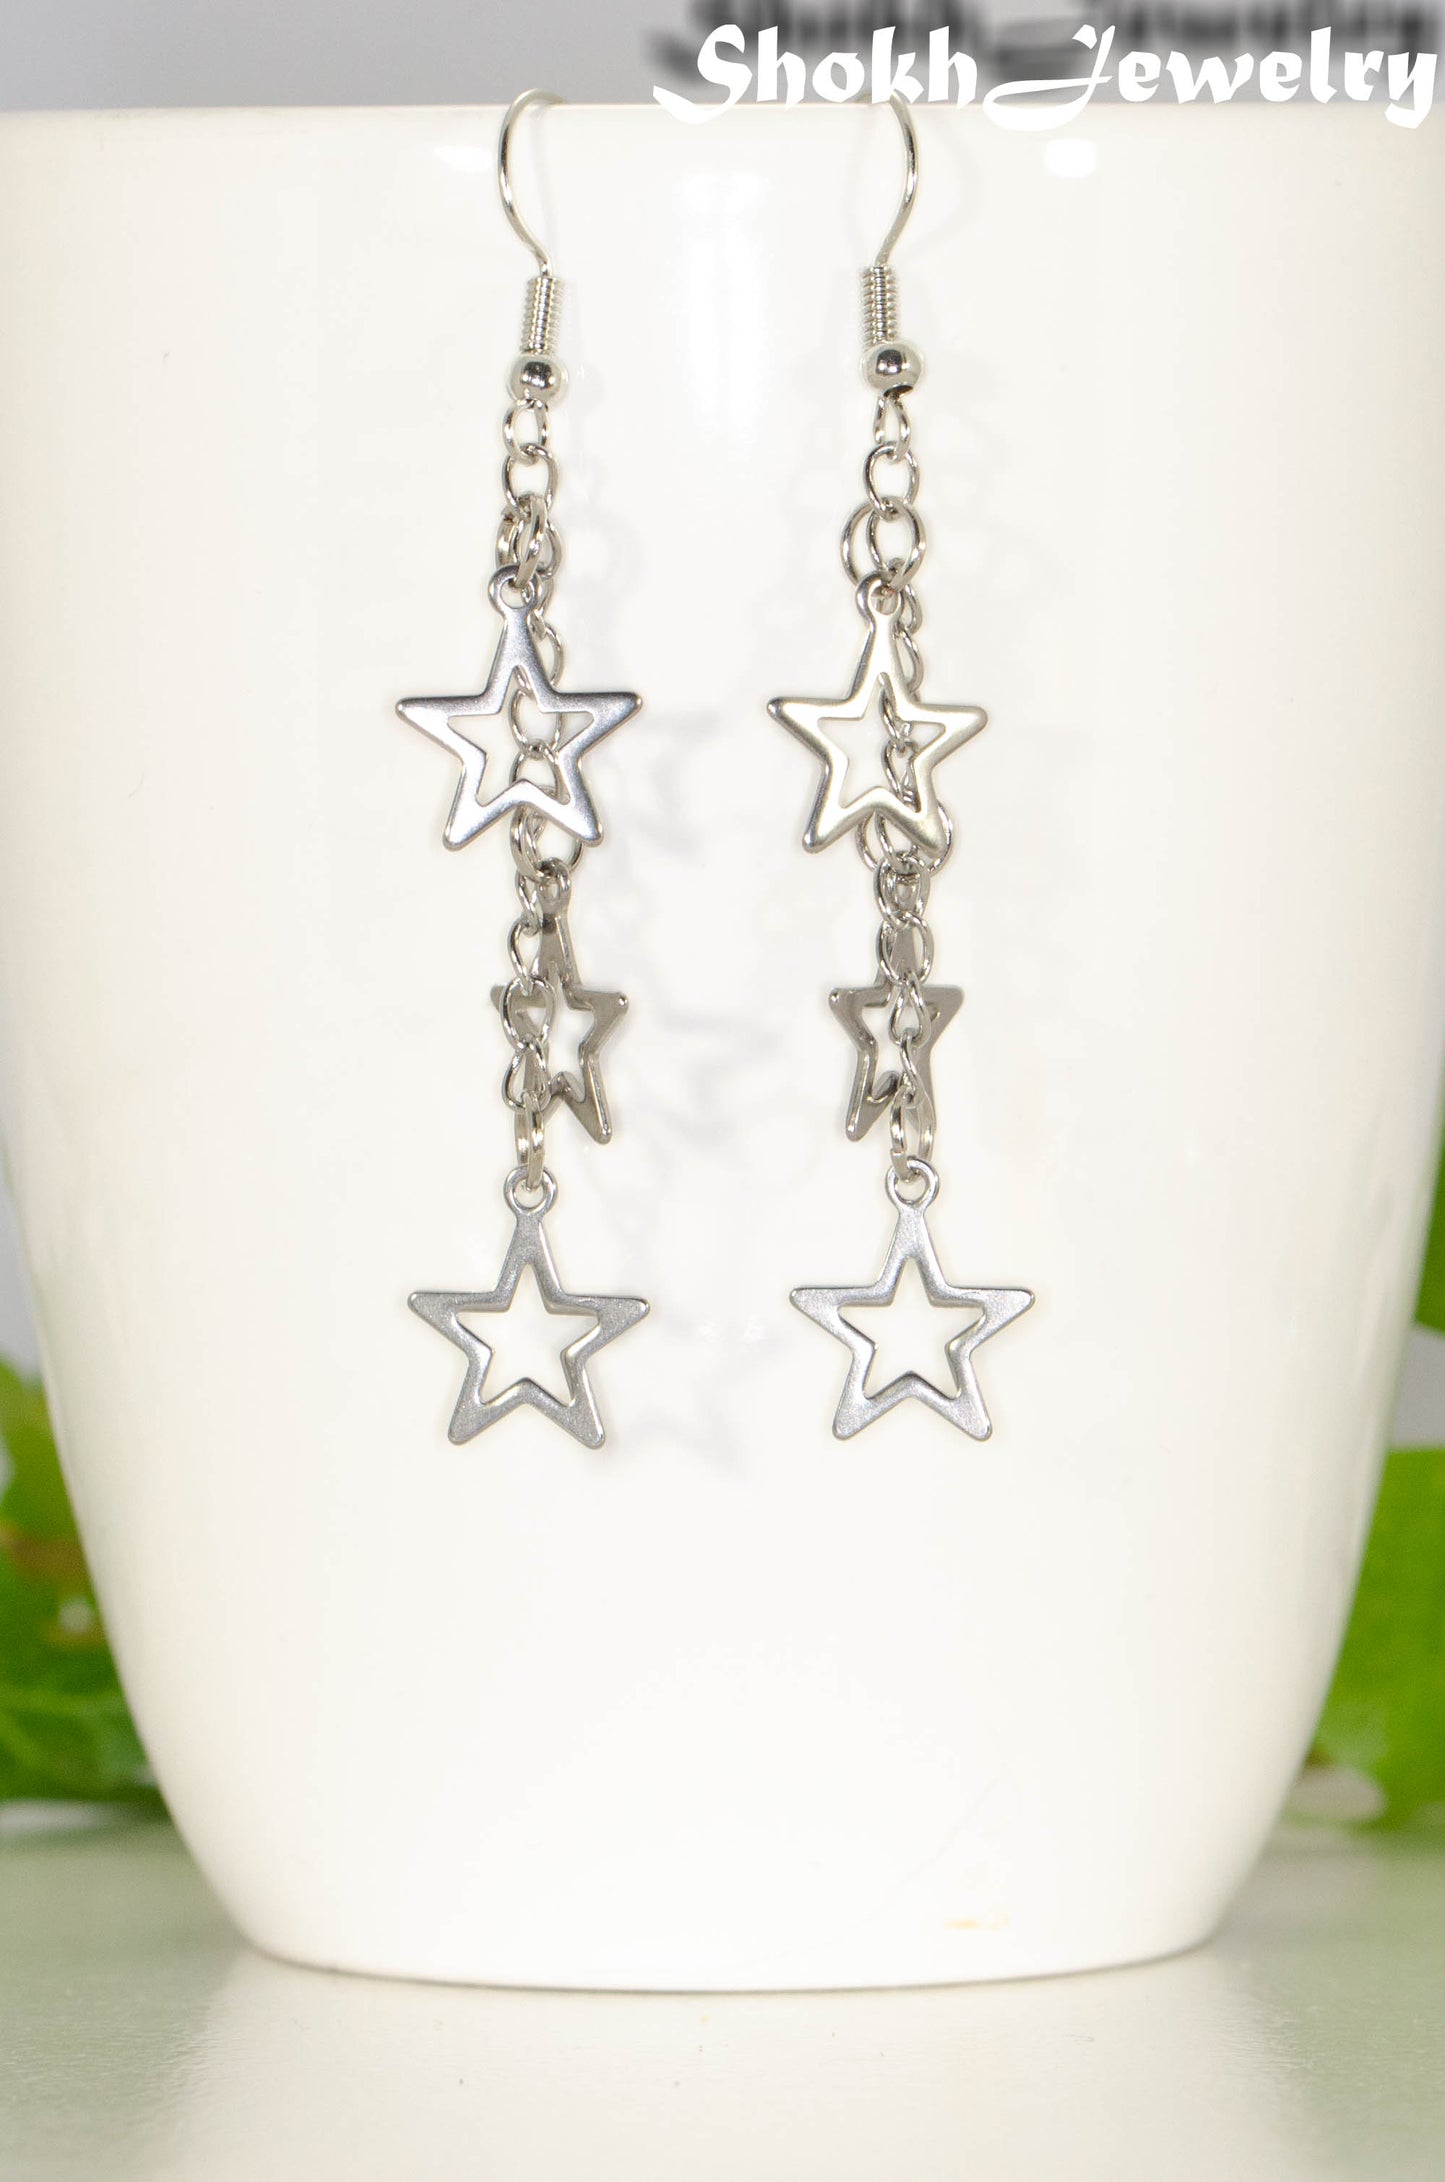 Stainless steel chain and star earrings on a mug